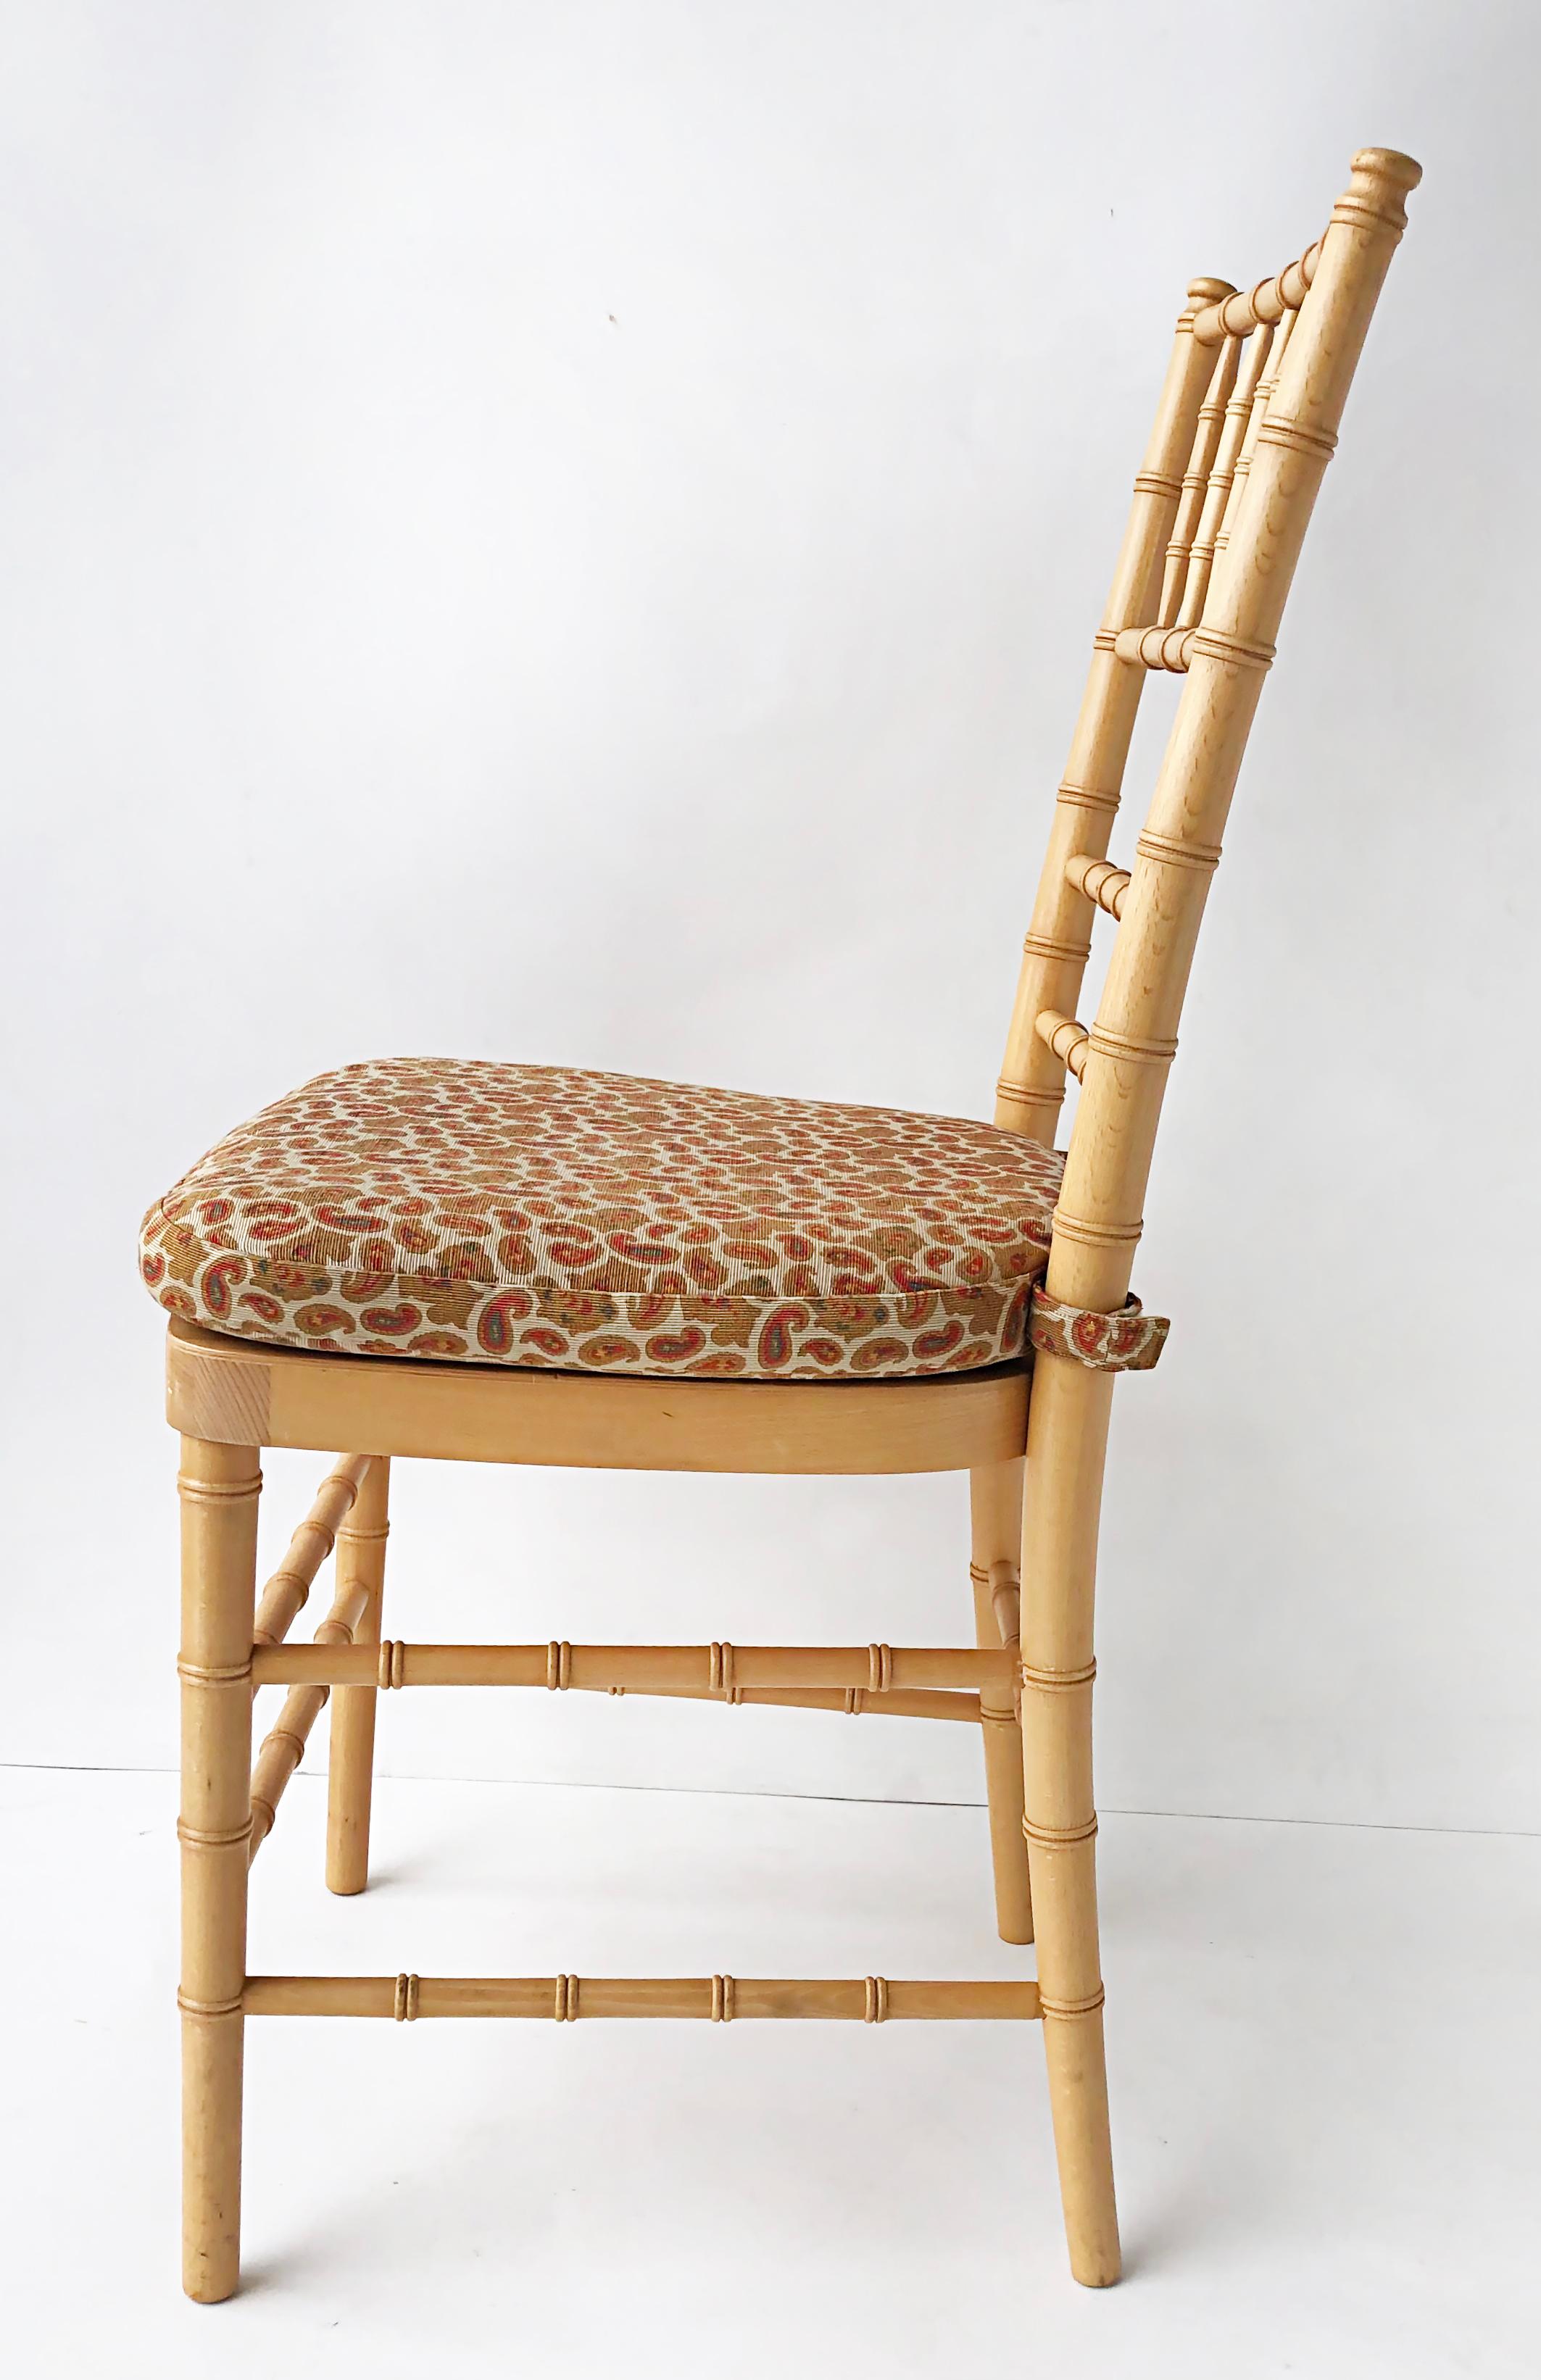 20th Century Faux Bamboo Chair with Loose Paisley Seat Cushion